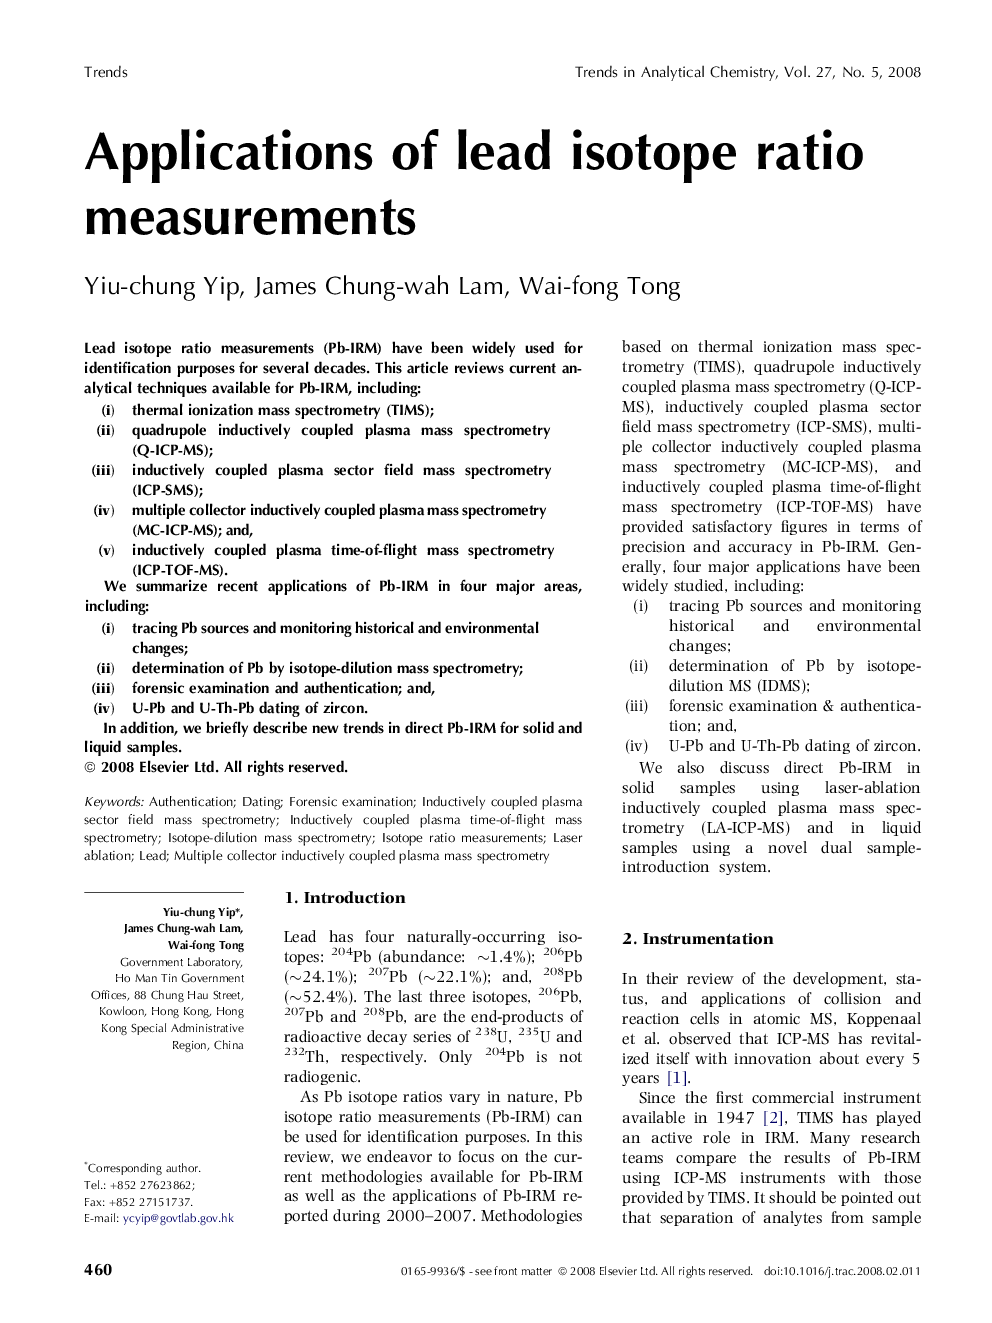 Applications of lead isotope ratio measurements